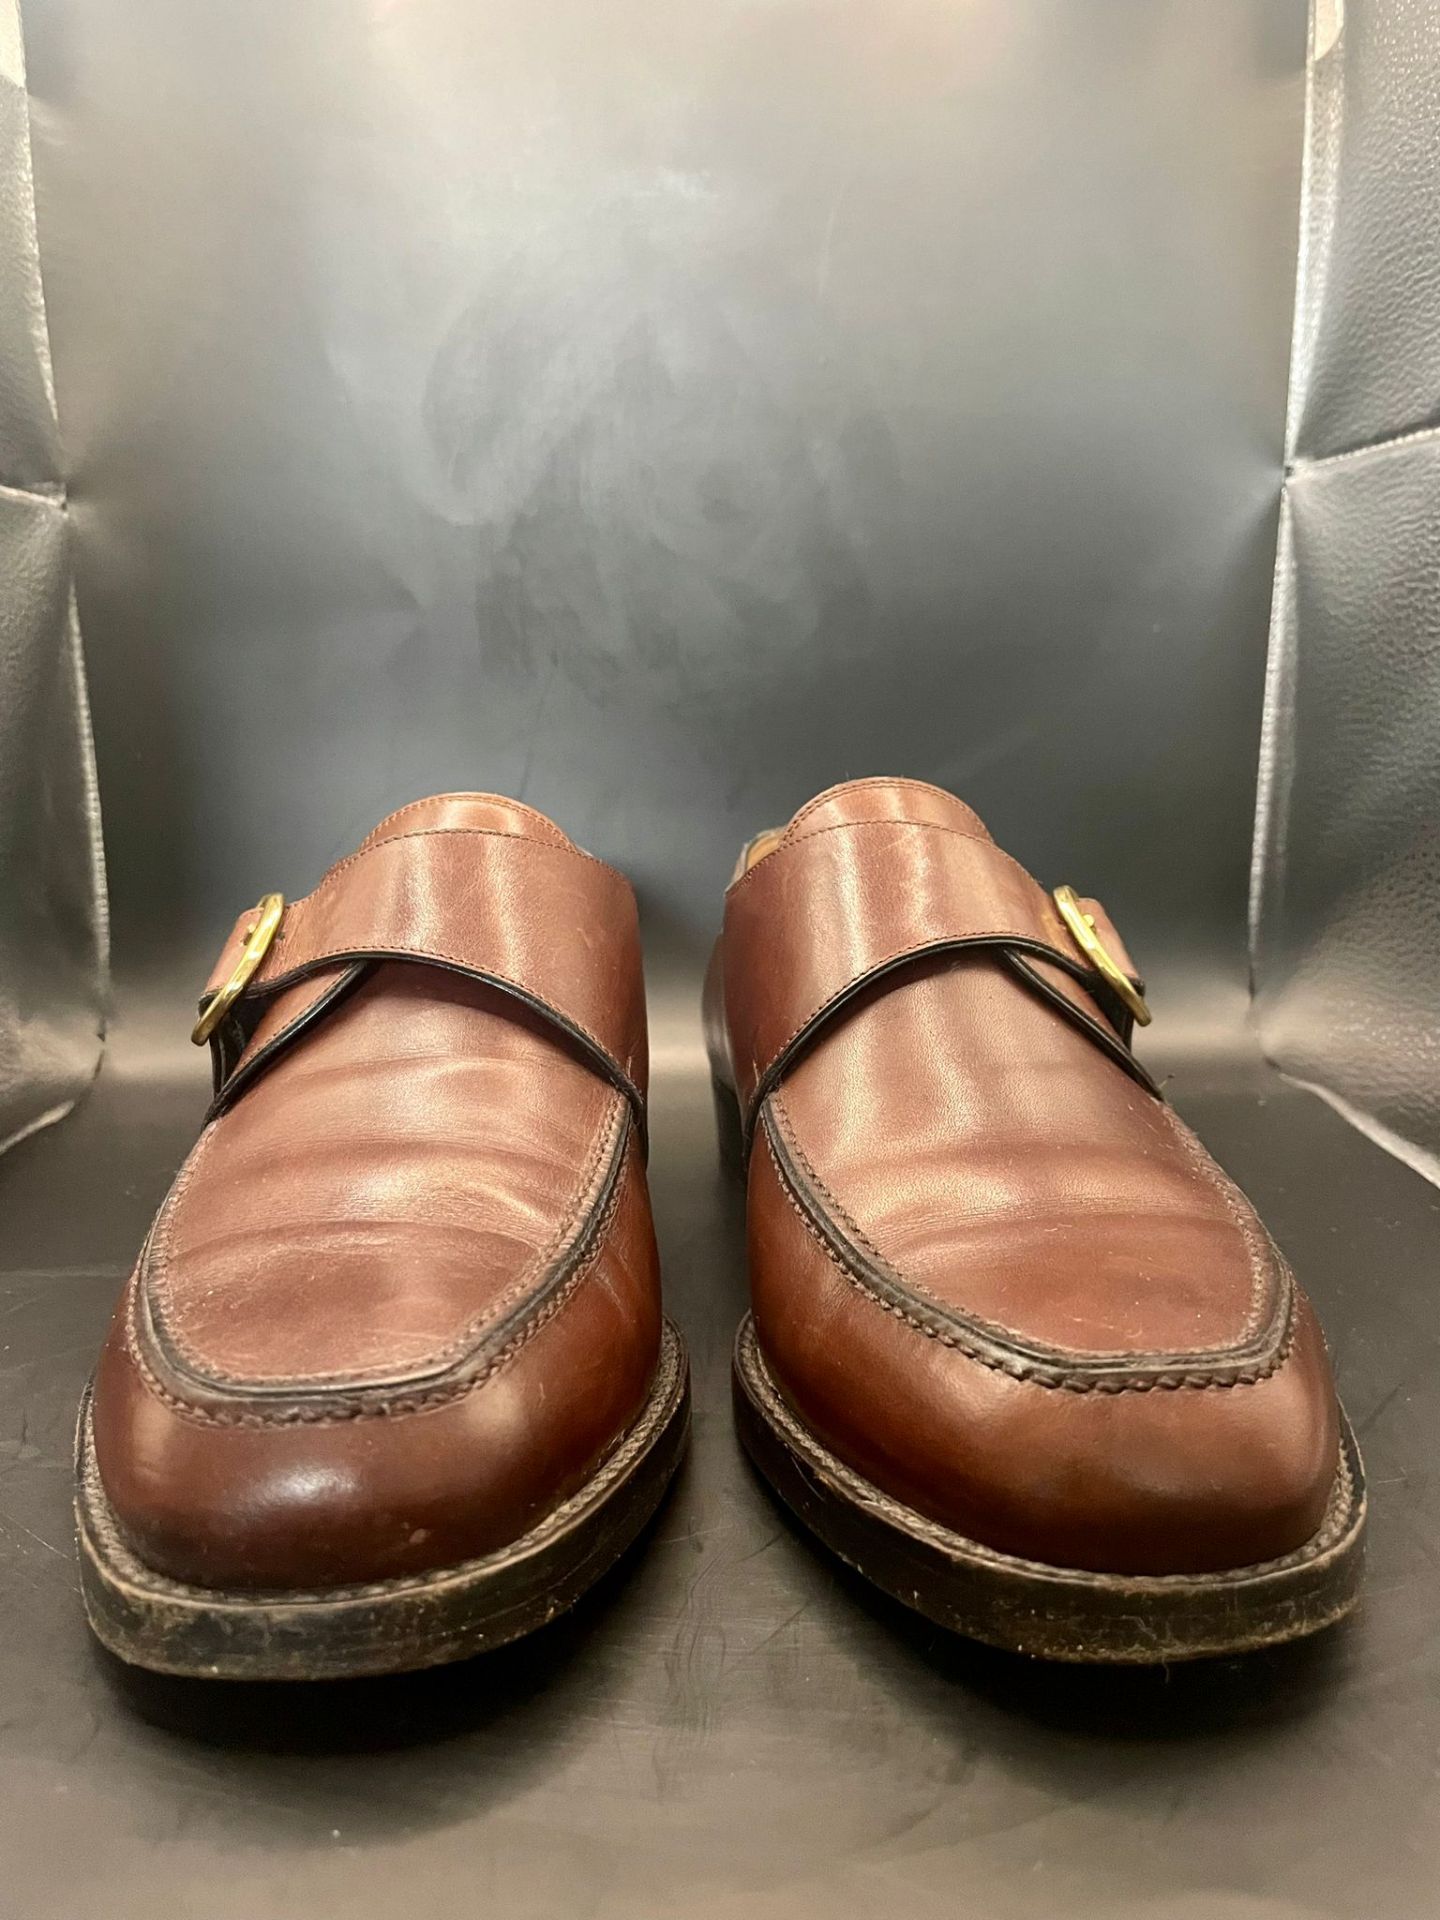 Fratelli Rossetti Monk Strap leather shoes size 7 with good soles. Good condition please see photos  - Image 2 of 14